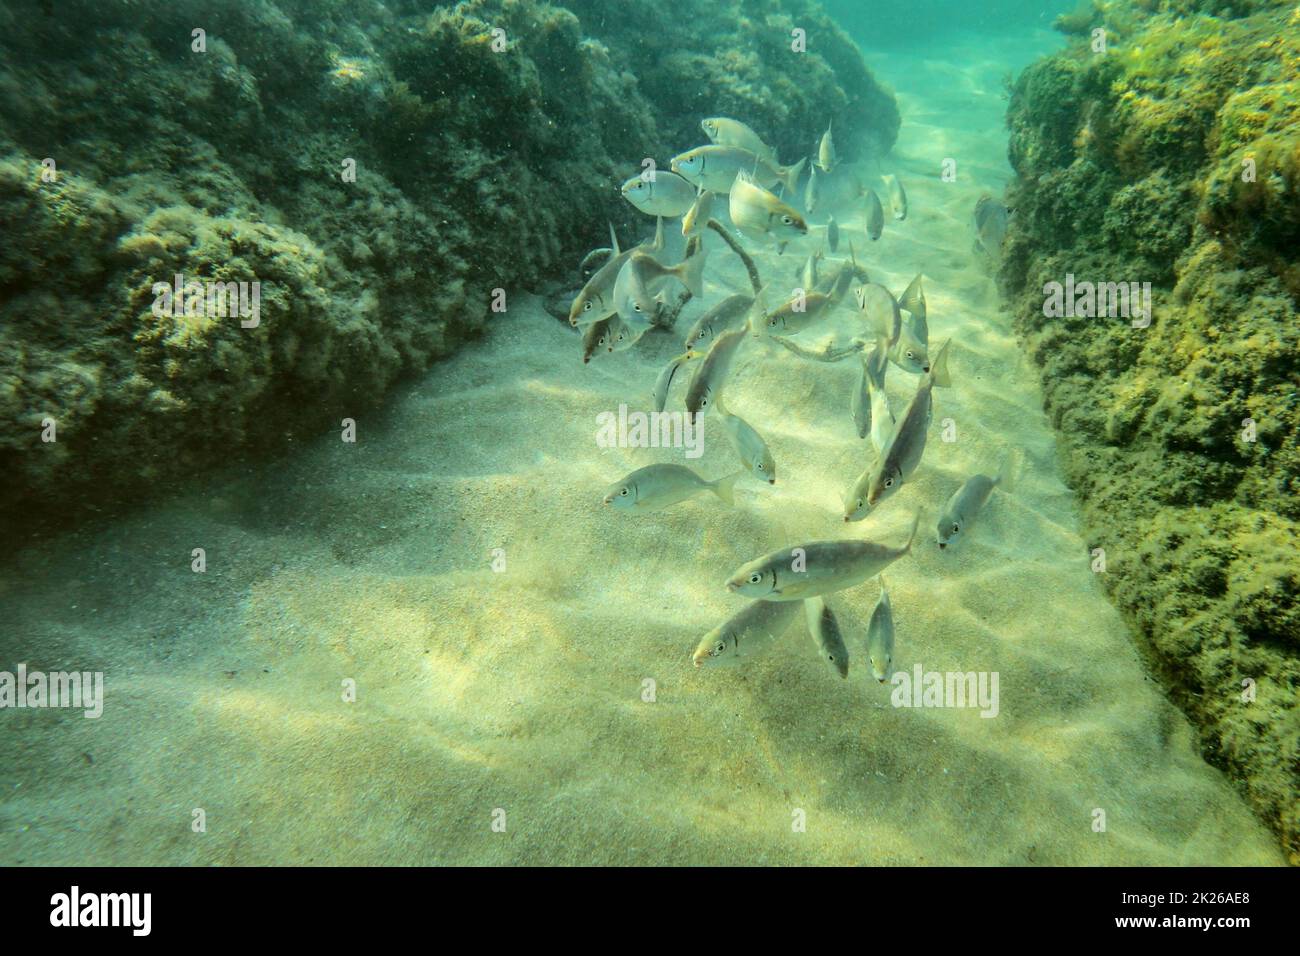 Underwater photo, group of small fishes swimming between algae covered rocks in shallow water, sun shining on sand sea bottom Stock Photo